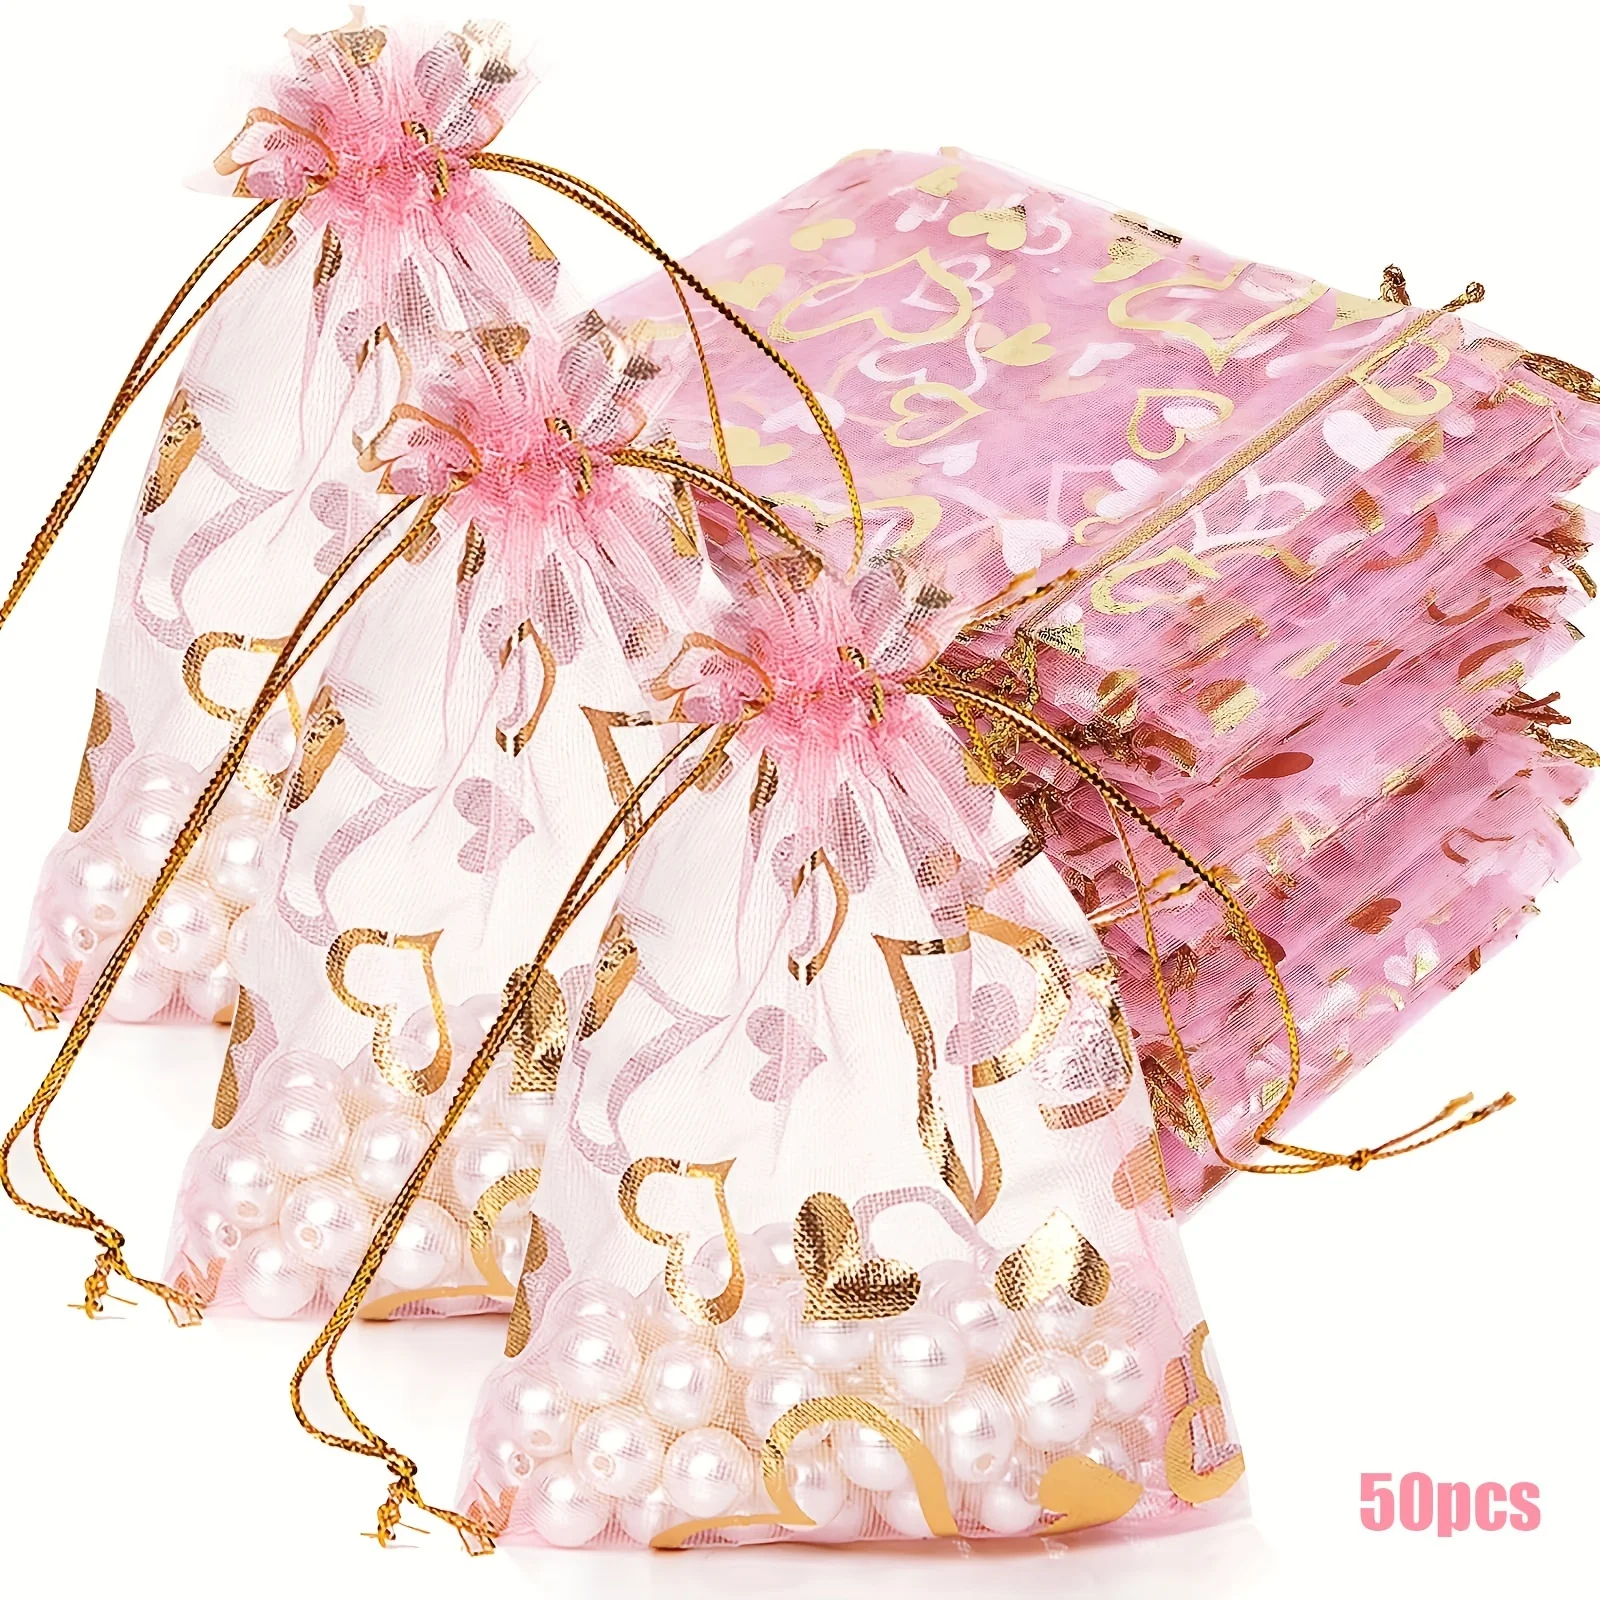 

50pcs Valentine's Day Organza Bags Love Heart Gift Bag Jewelry Packaging Pouch Drawstring Wedding Favors Bag for Wedding Party